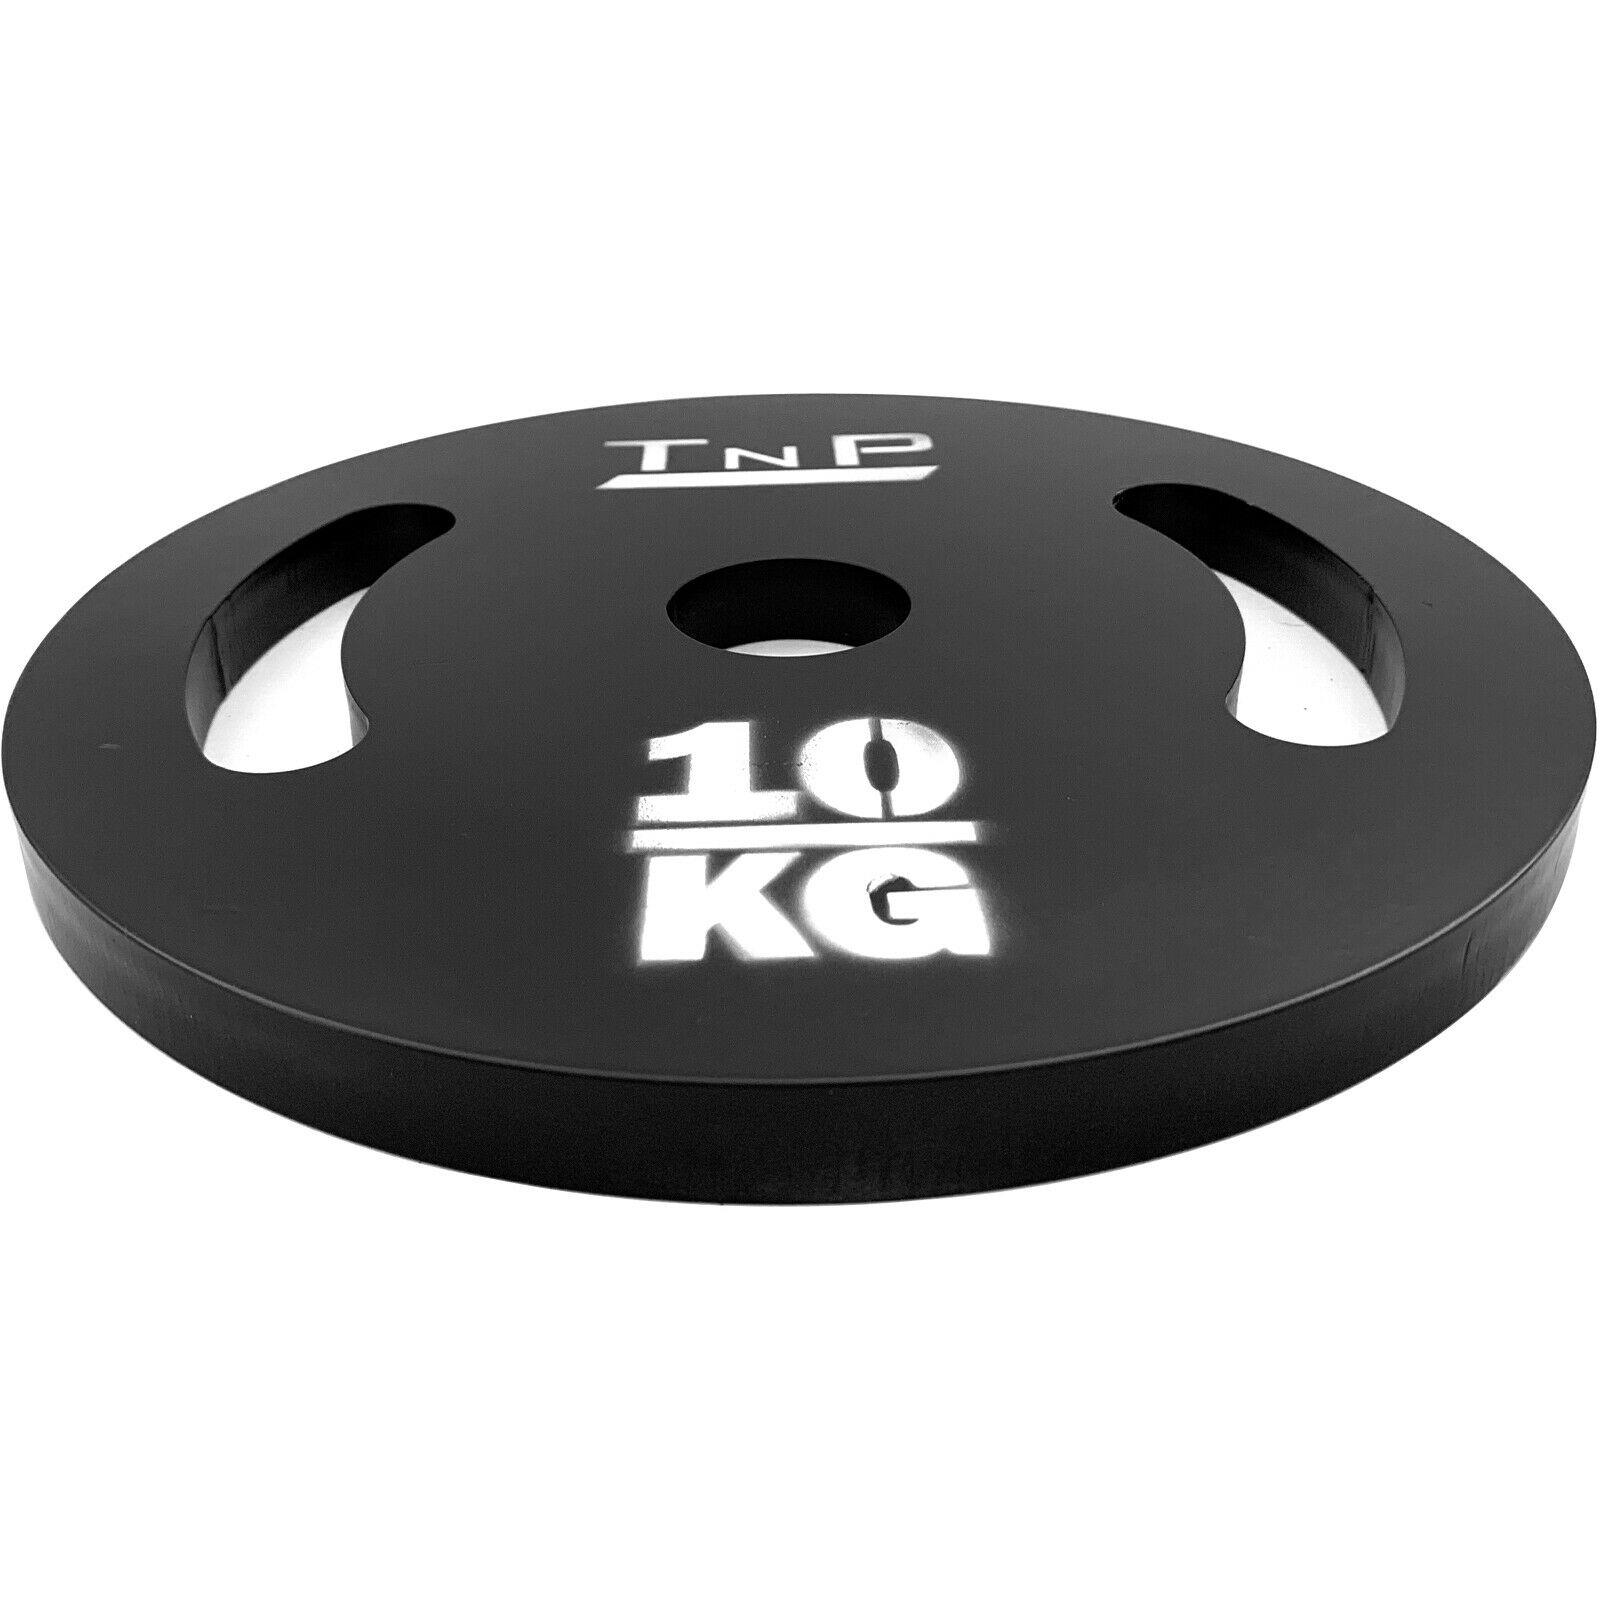 10kg weight plate